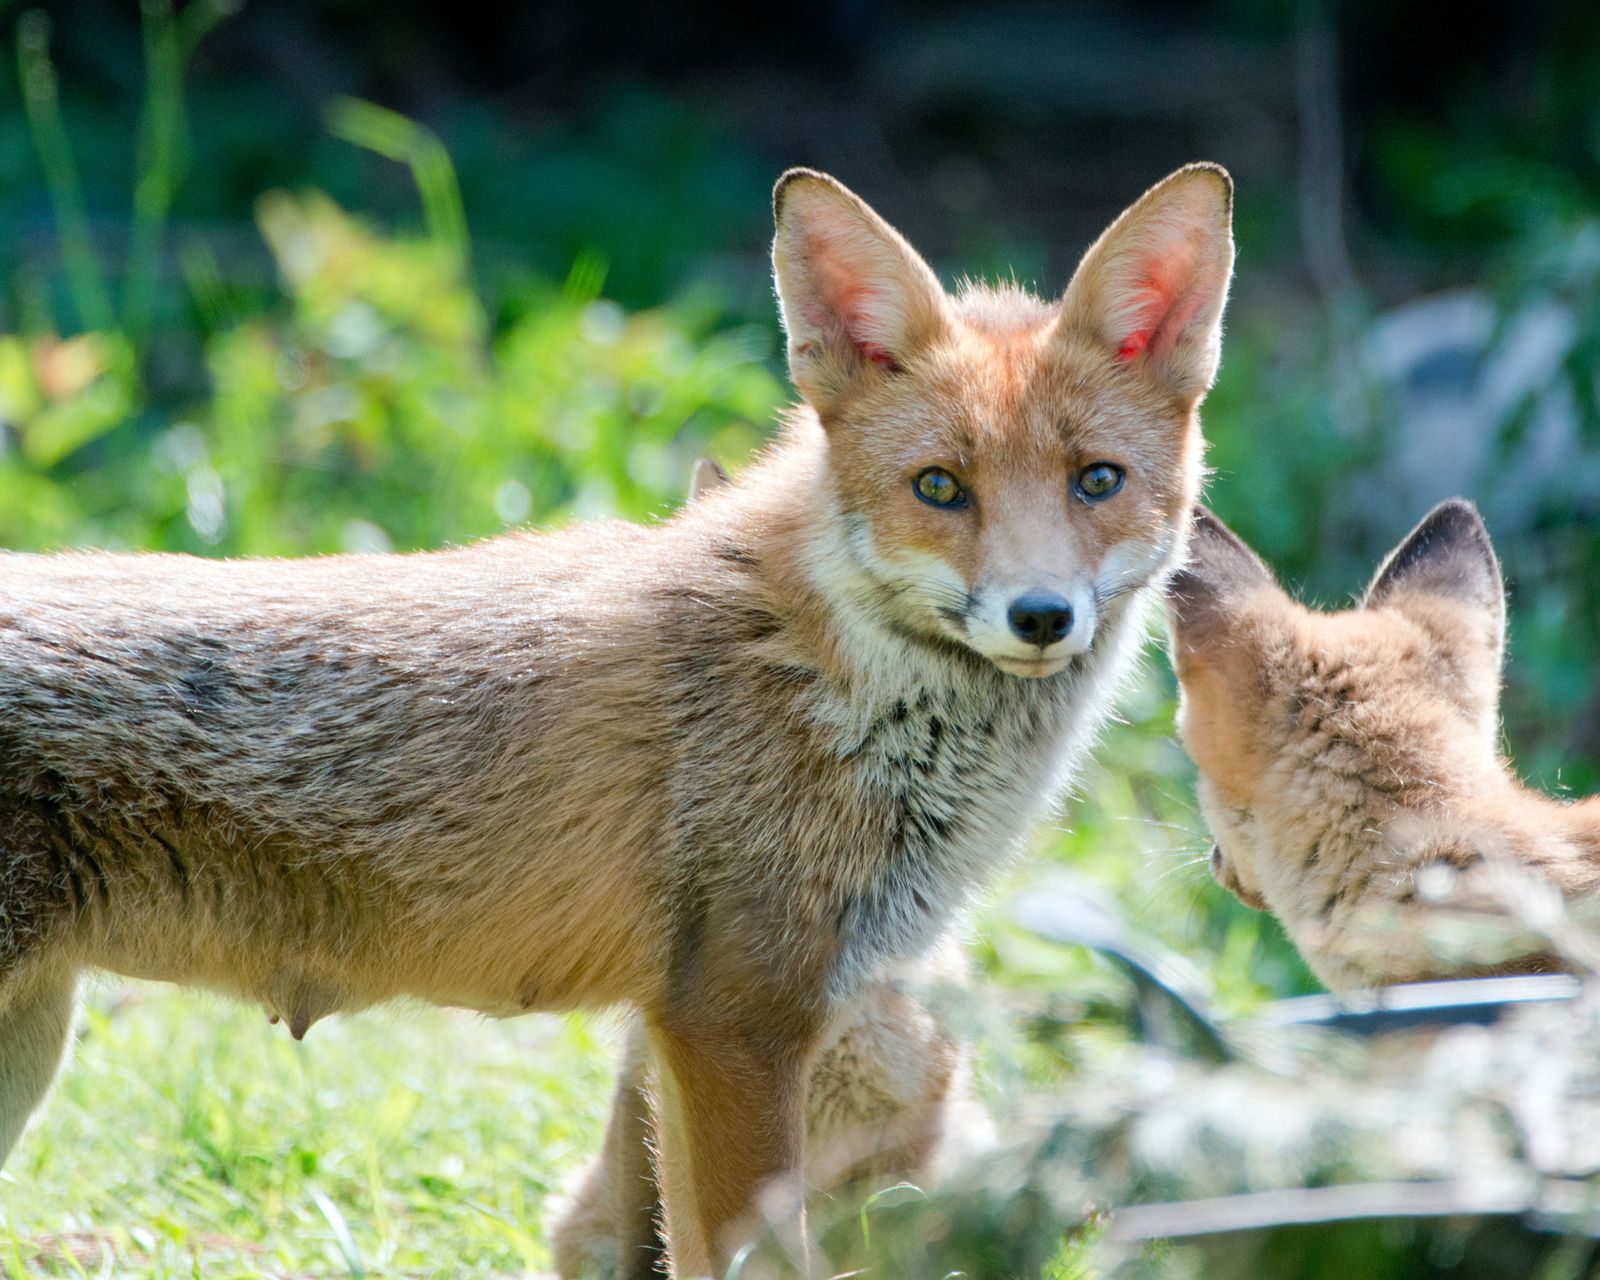 How to deter foxes from your yard and garden, without harming them ...